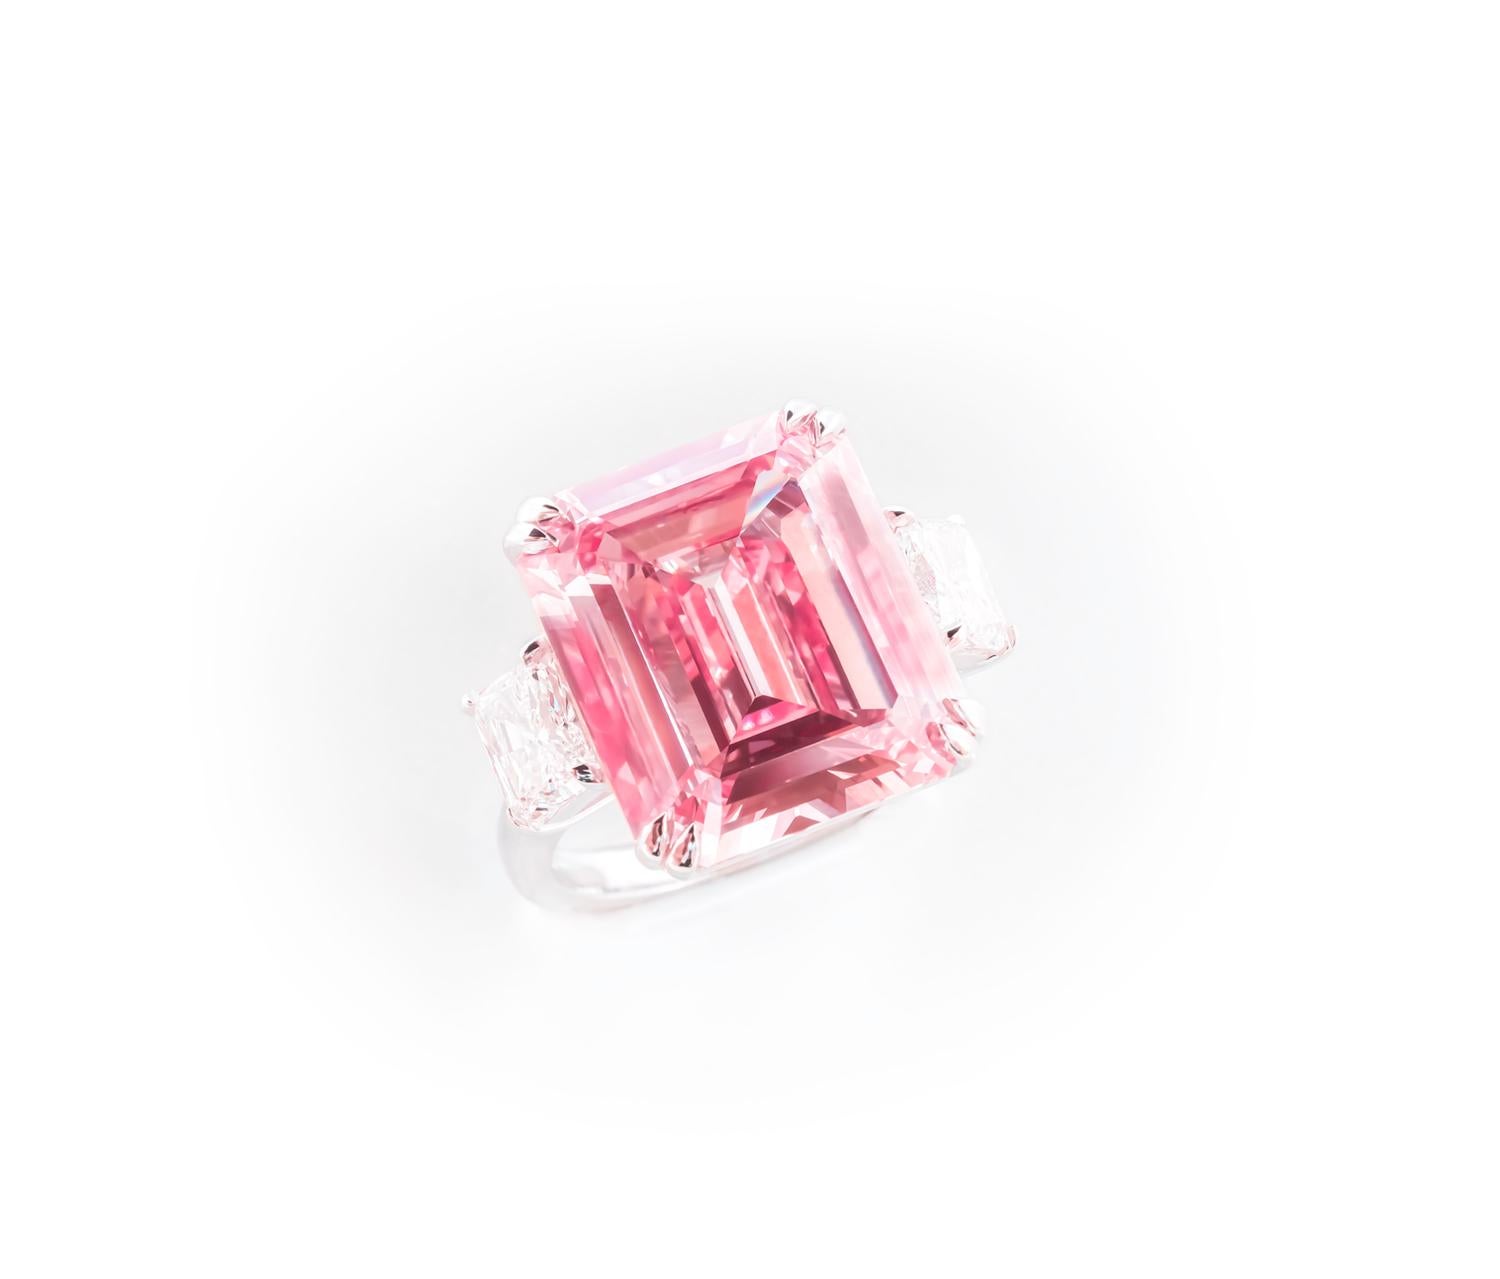 12 Carat Fancy Intense Pink Diamond Cocktail Ring with Emerald Cut GIA In Excellent Condition For Sale In Carmel By The Sea, CA